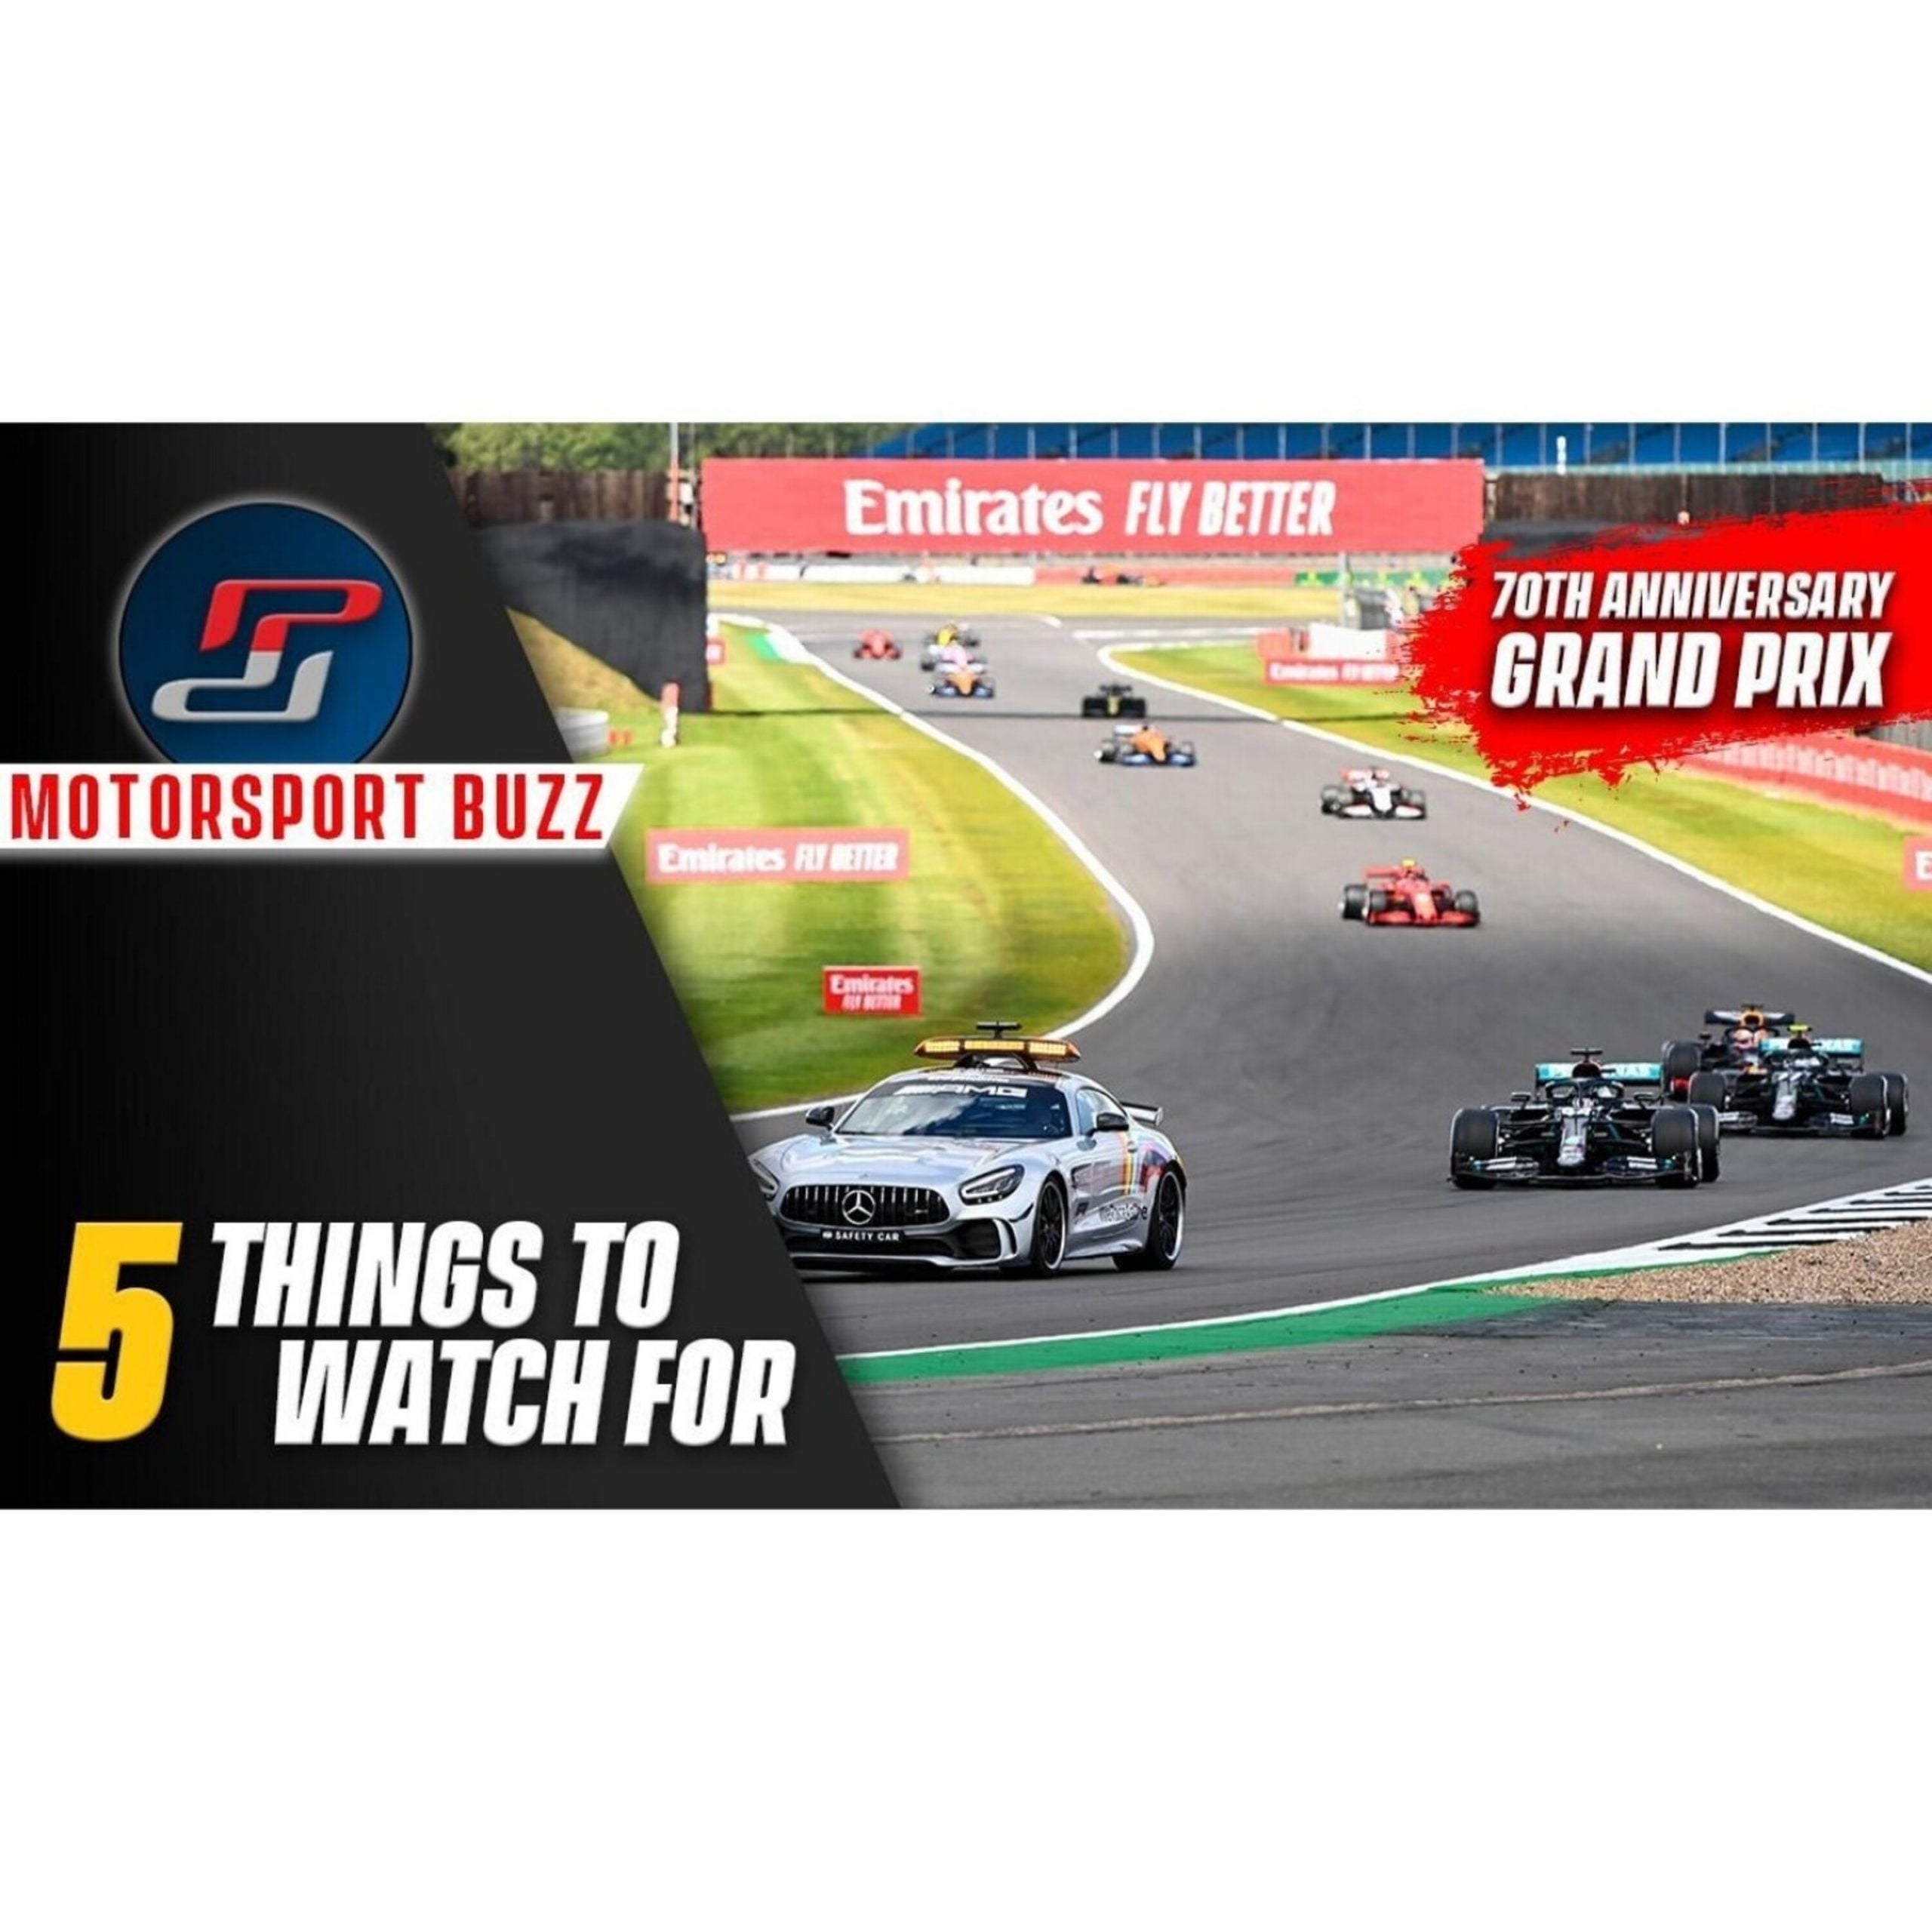 35: 70th Anniversary GP: 5 Things To Watch For